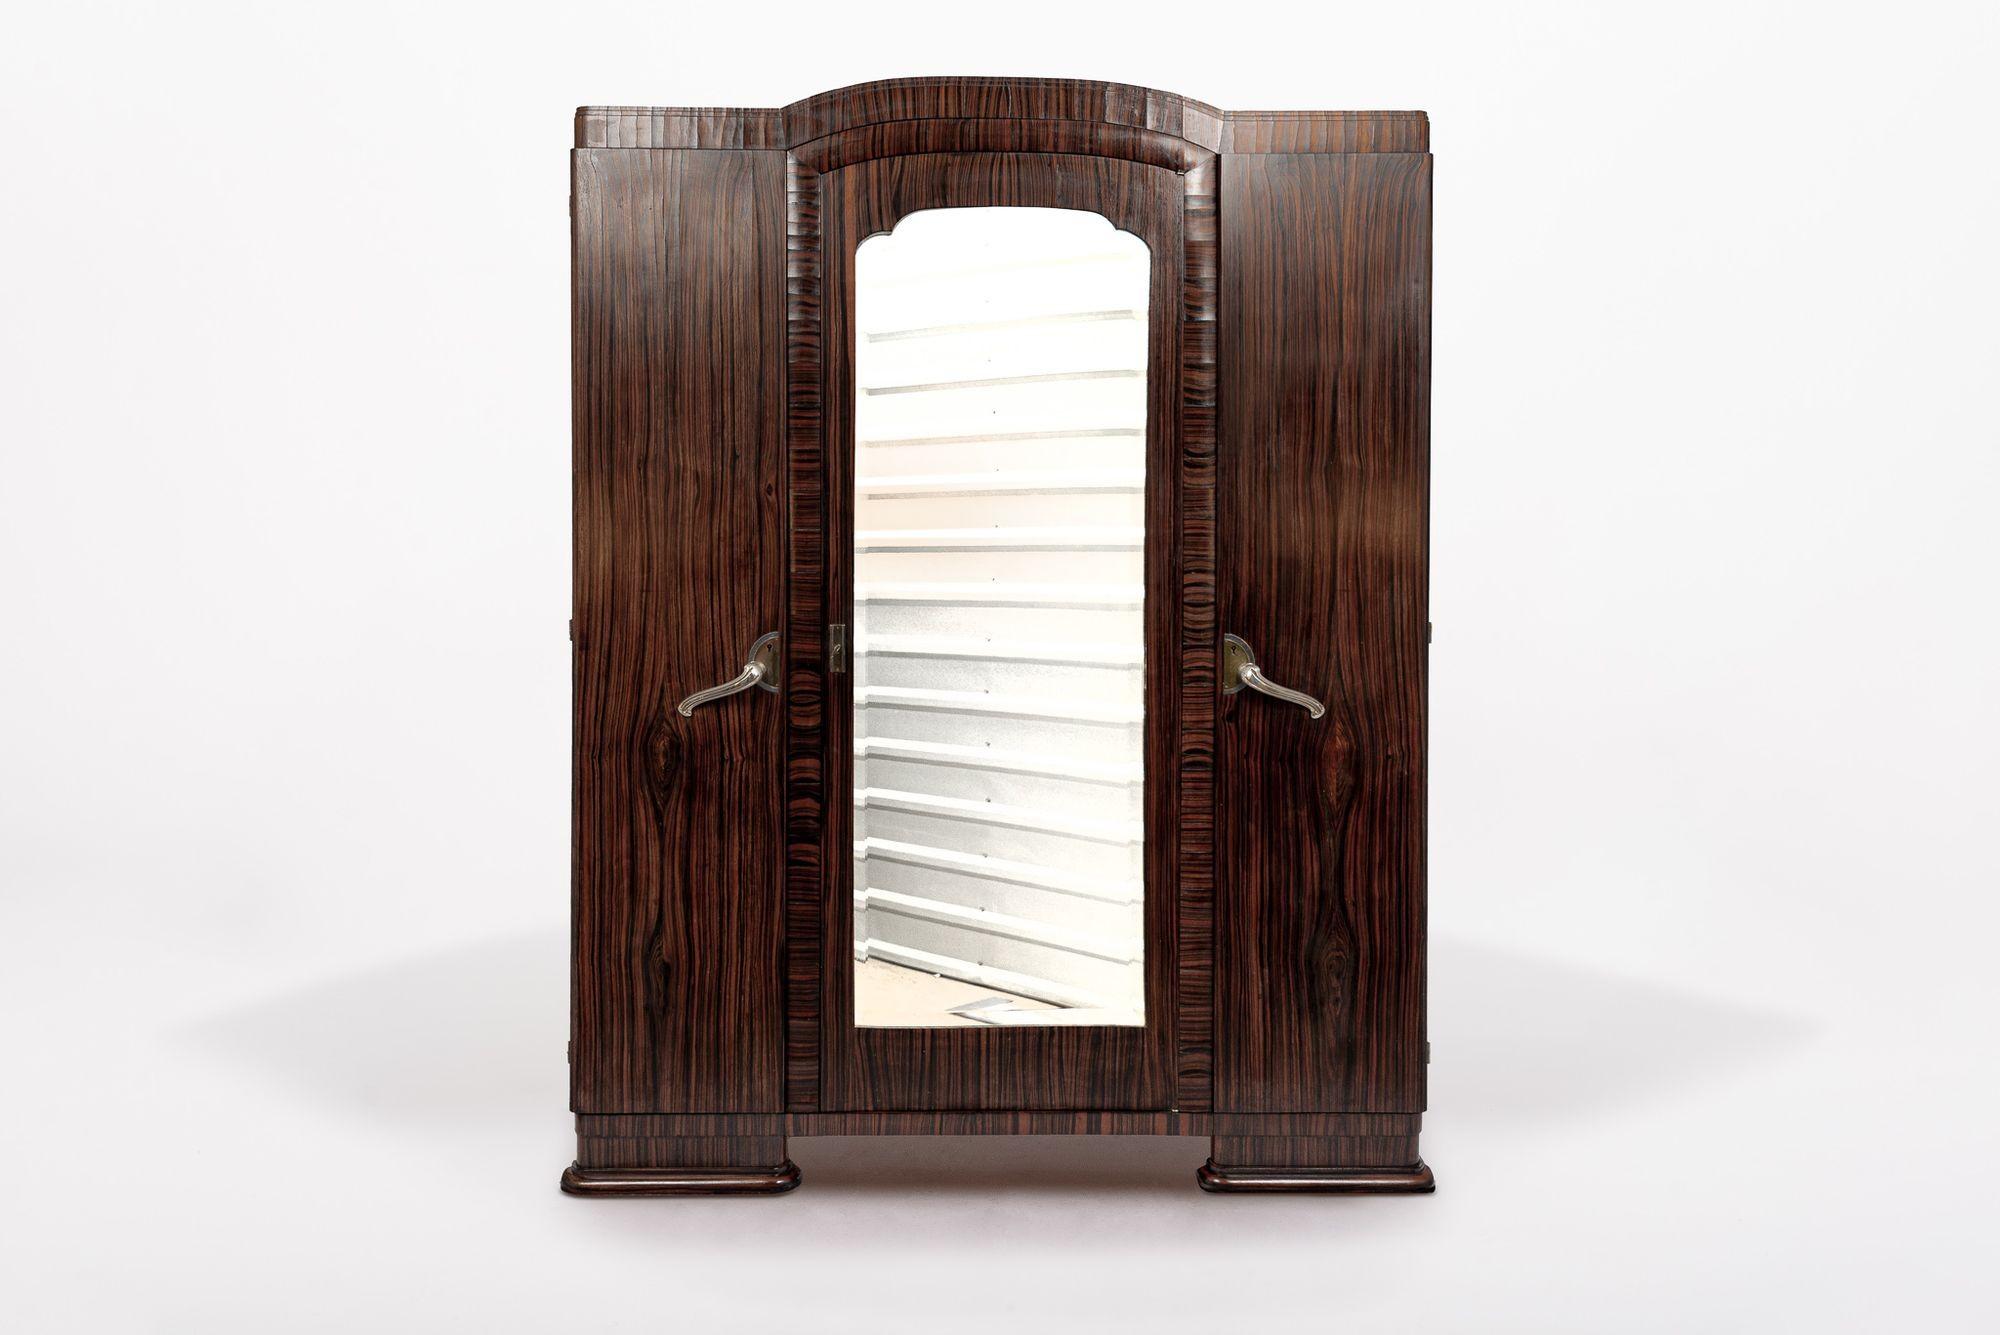 This exquisite antique Art Deco wooden wardrobe armoire cabinet was made in France circa 1940. This tall cabinet is impeccably handcrafted from solid wood and Macassar Ebony veneer with stunning deep, rich dark brown and black grain patterning. The